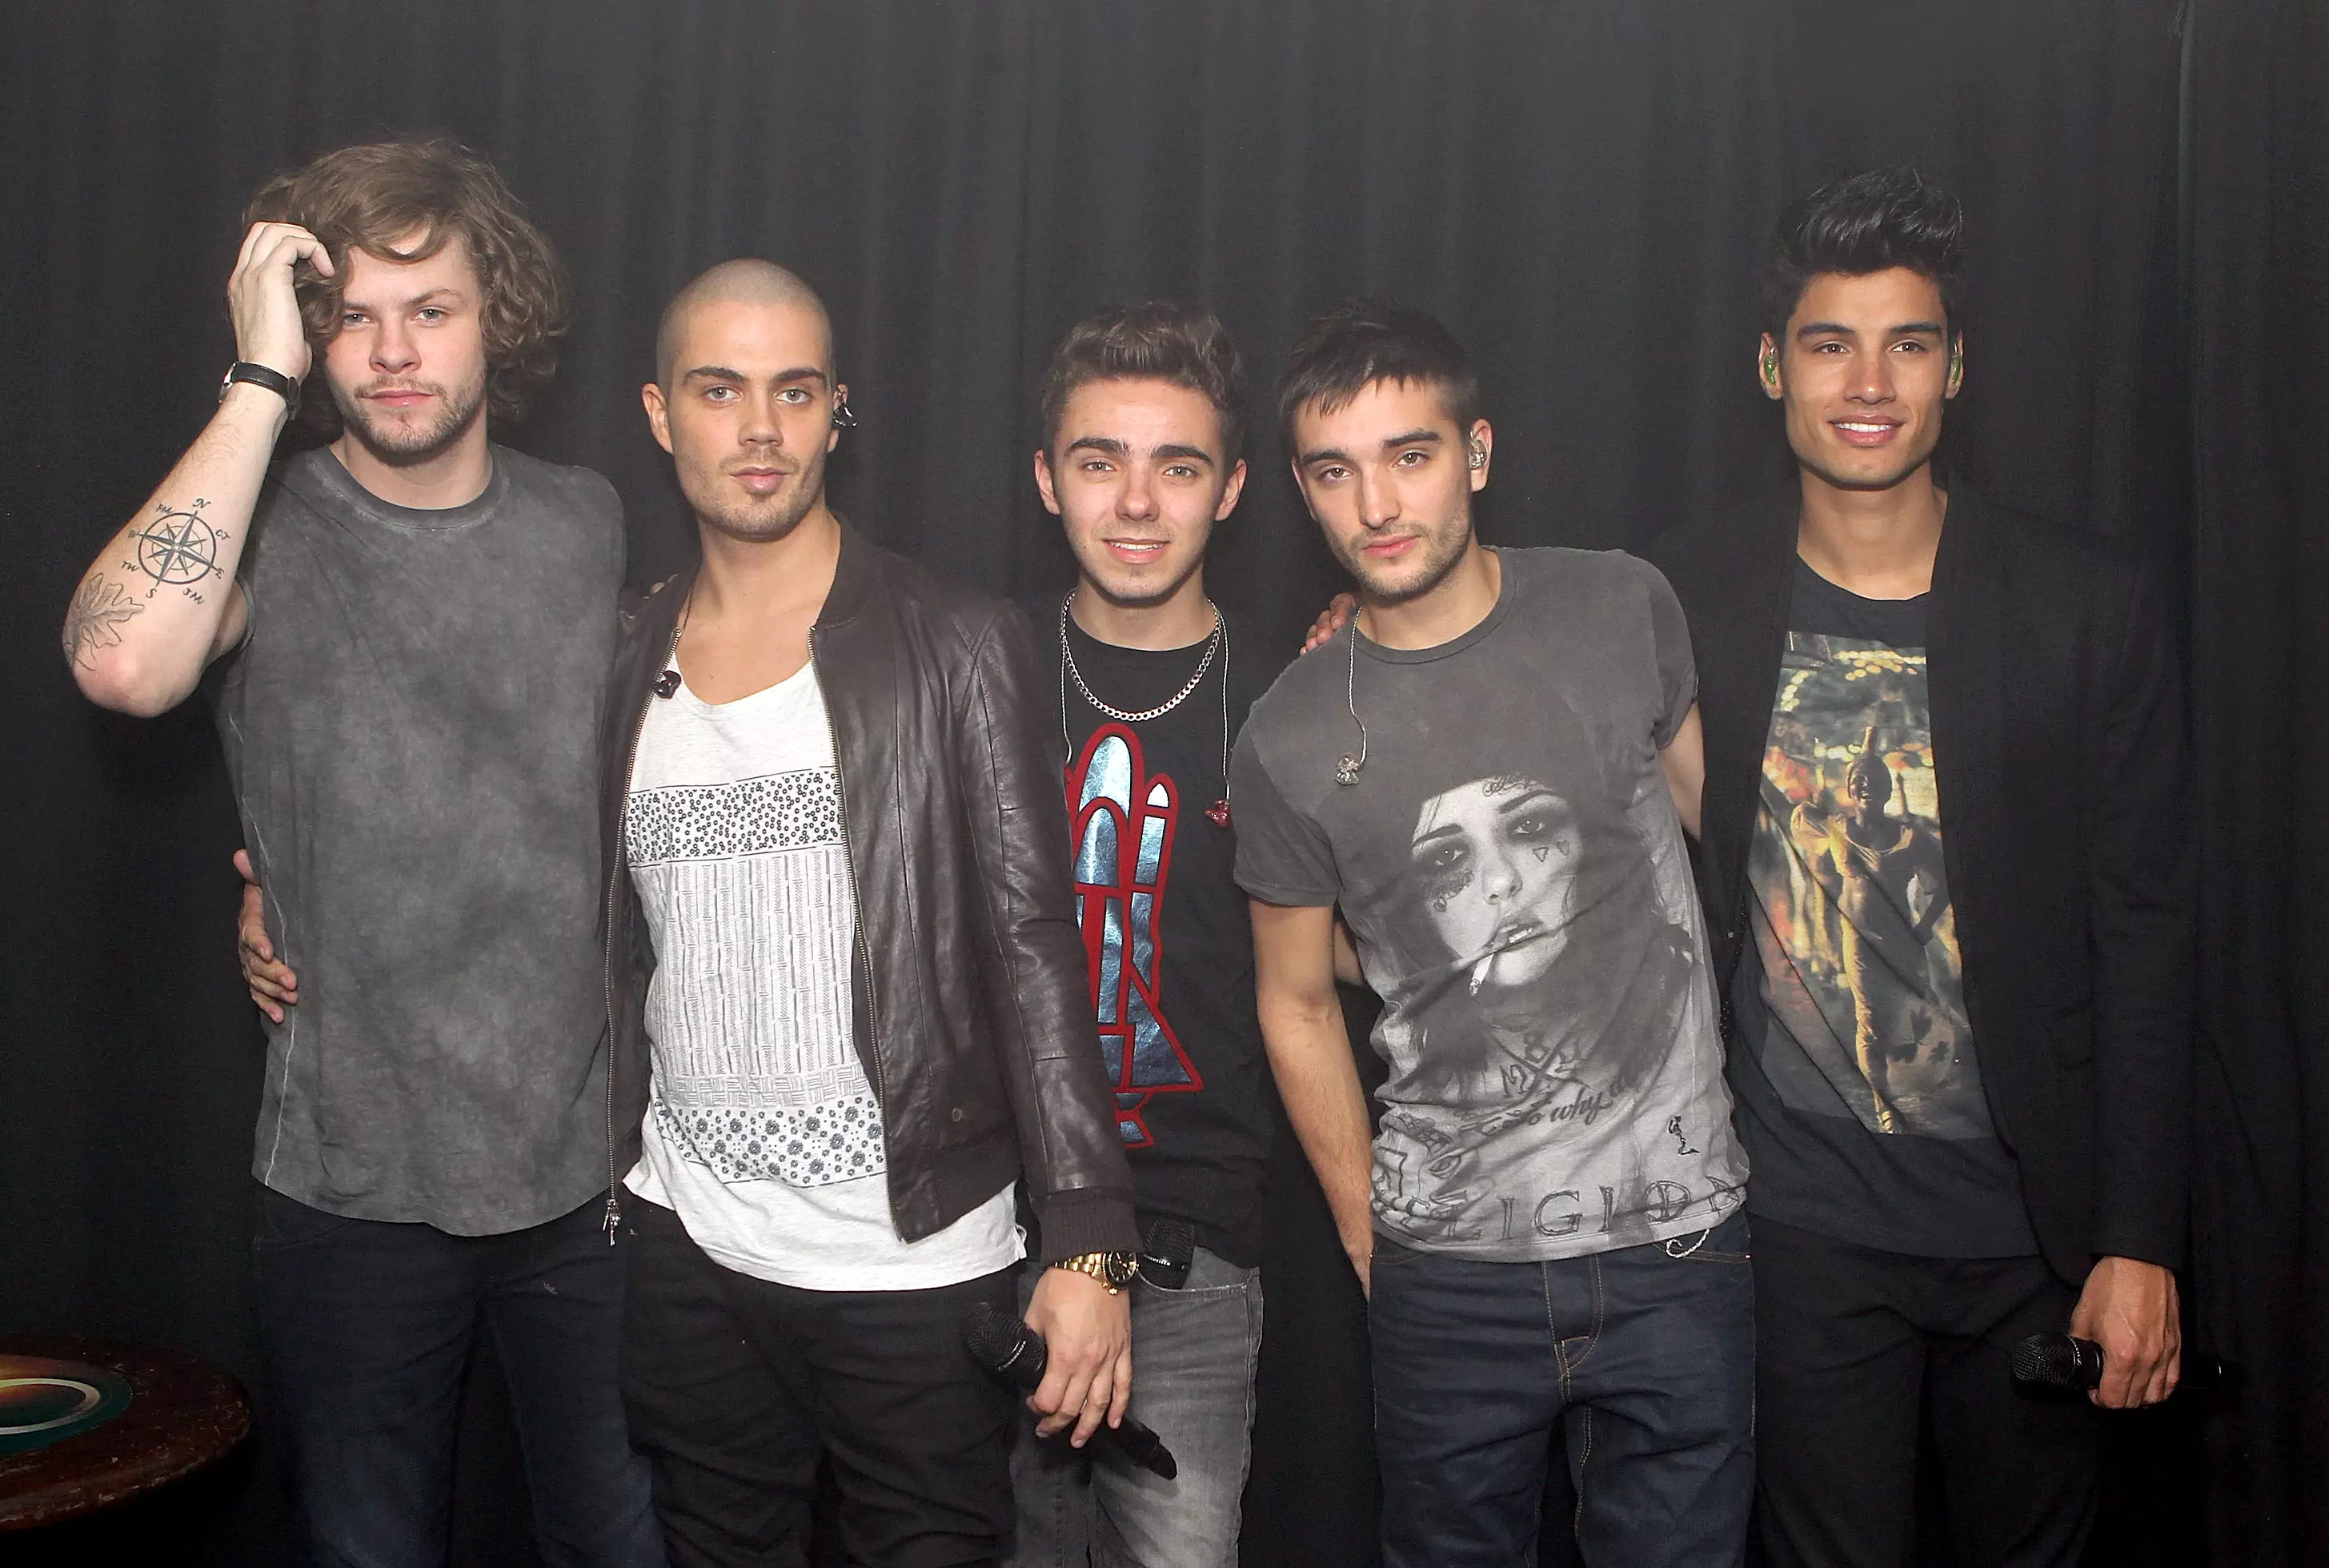 The Wanted boys are supporting Tom (